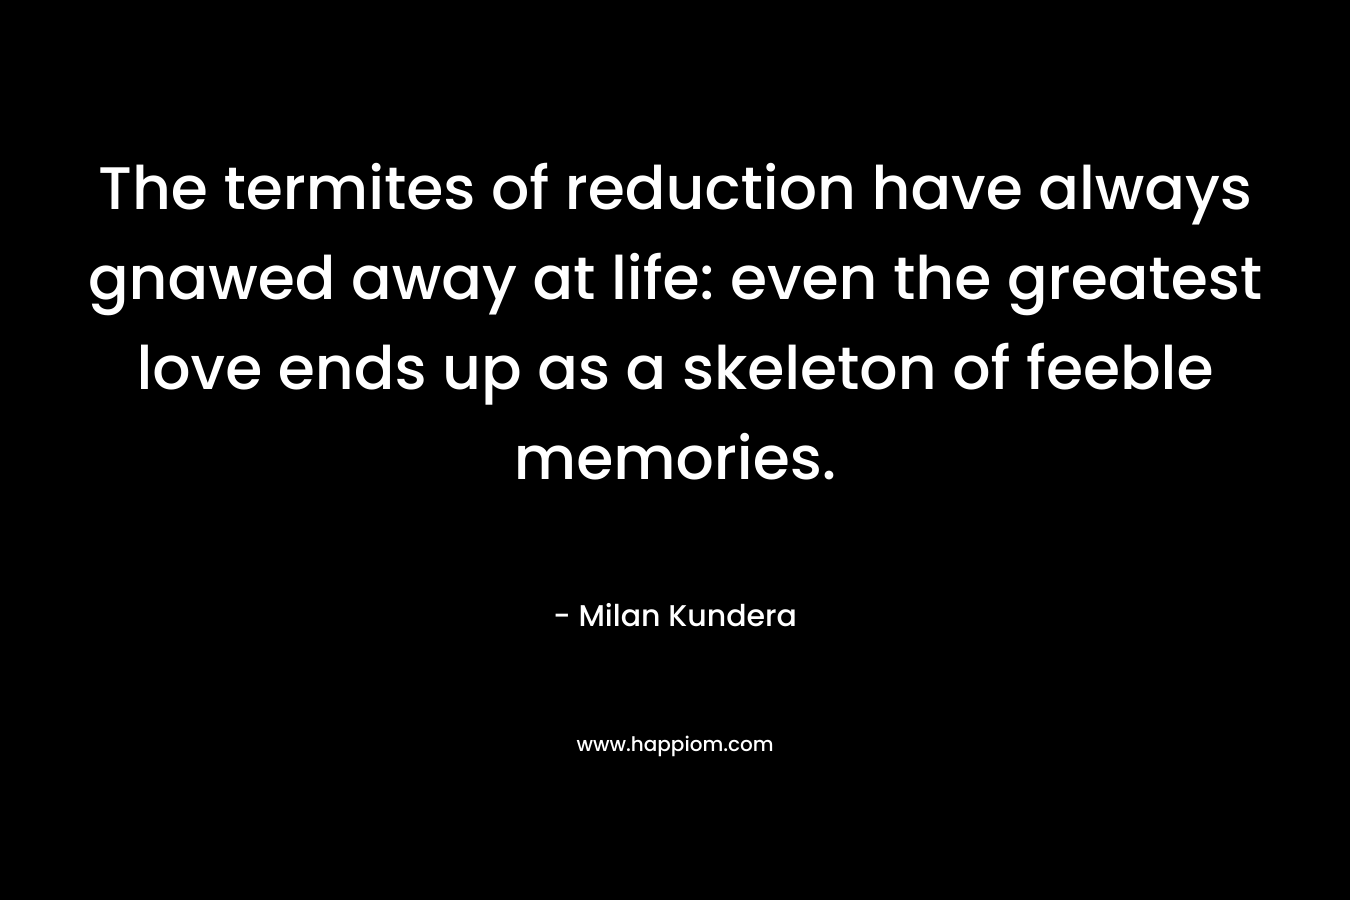 The termites of reduction have always gnawed away at life: even the greatest love ends up as a skeleton of feeble memories. – Milan Kundera